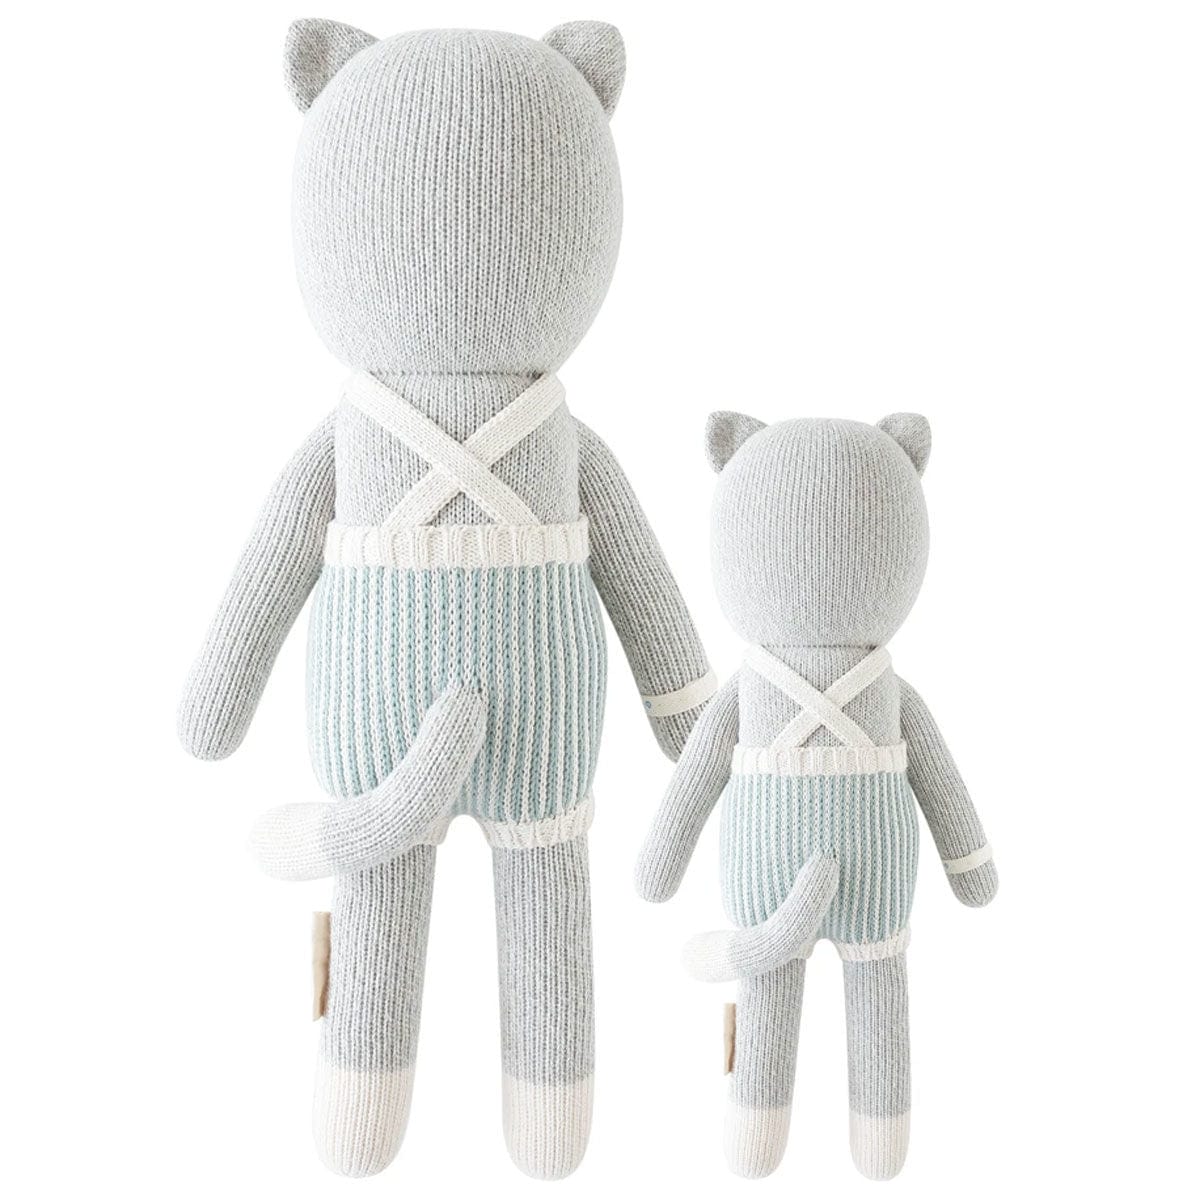 cuddle + kind doll Little (13") cuddle + kind Hand-Knit Doll - Dylan the Kitten